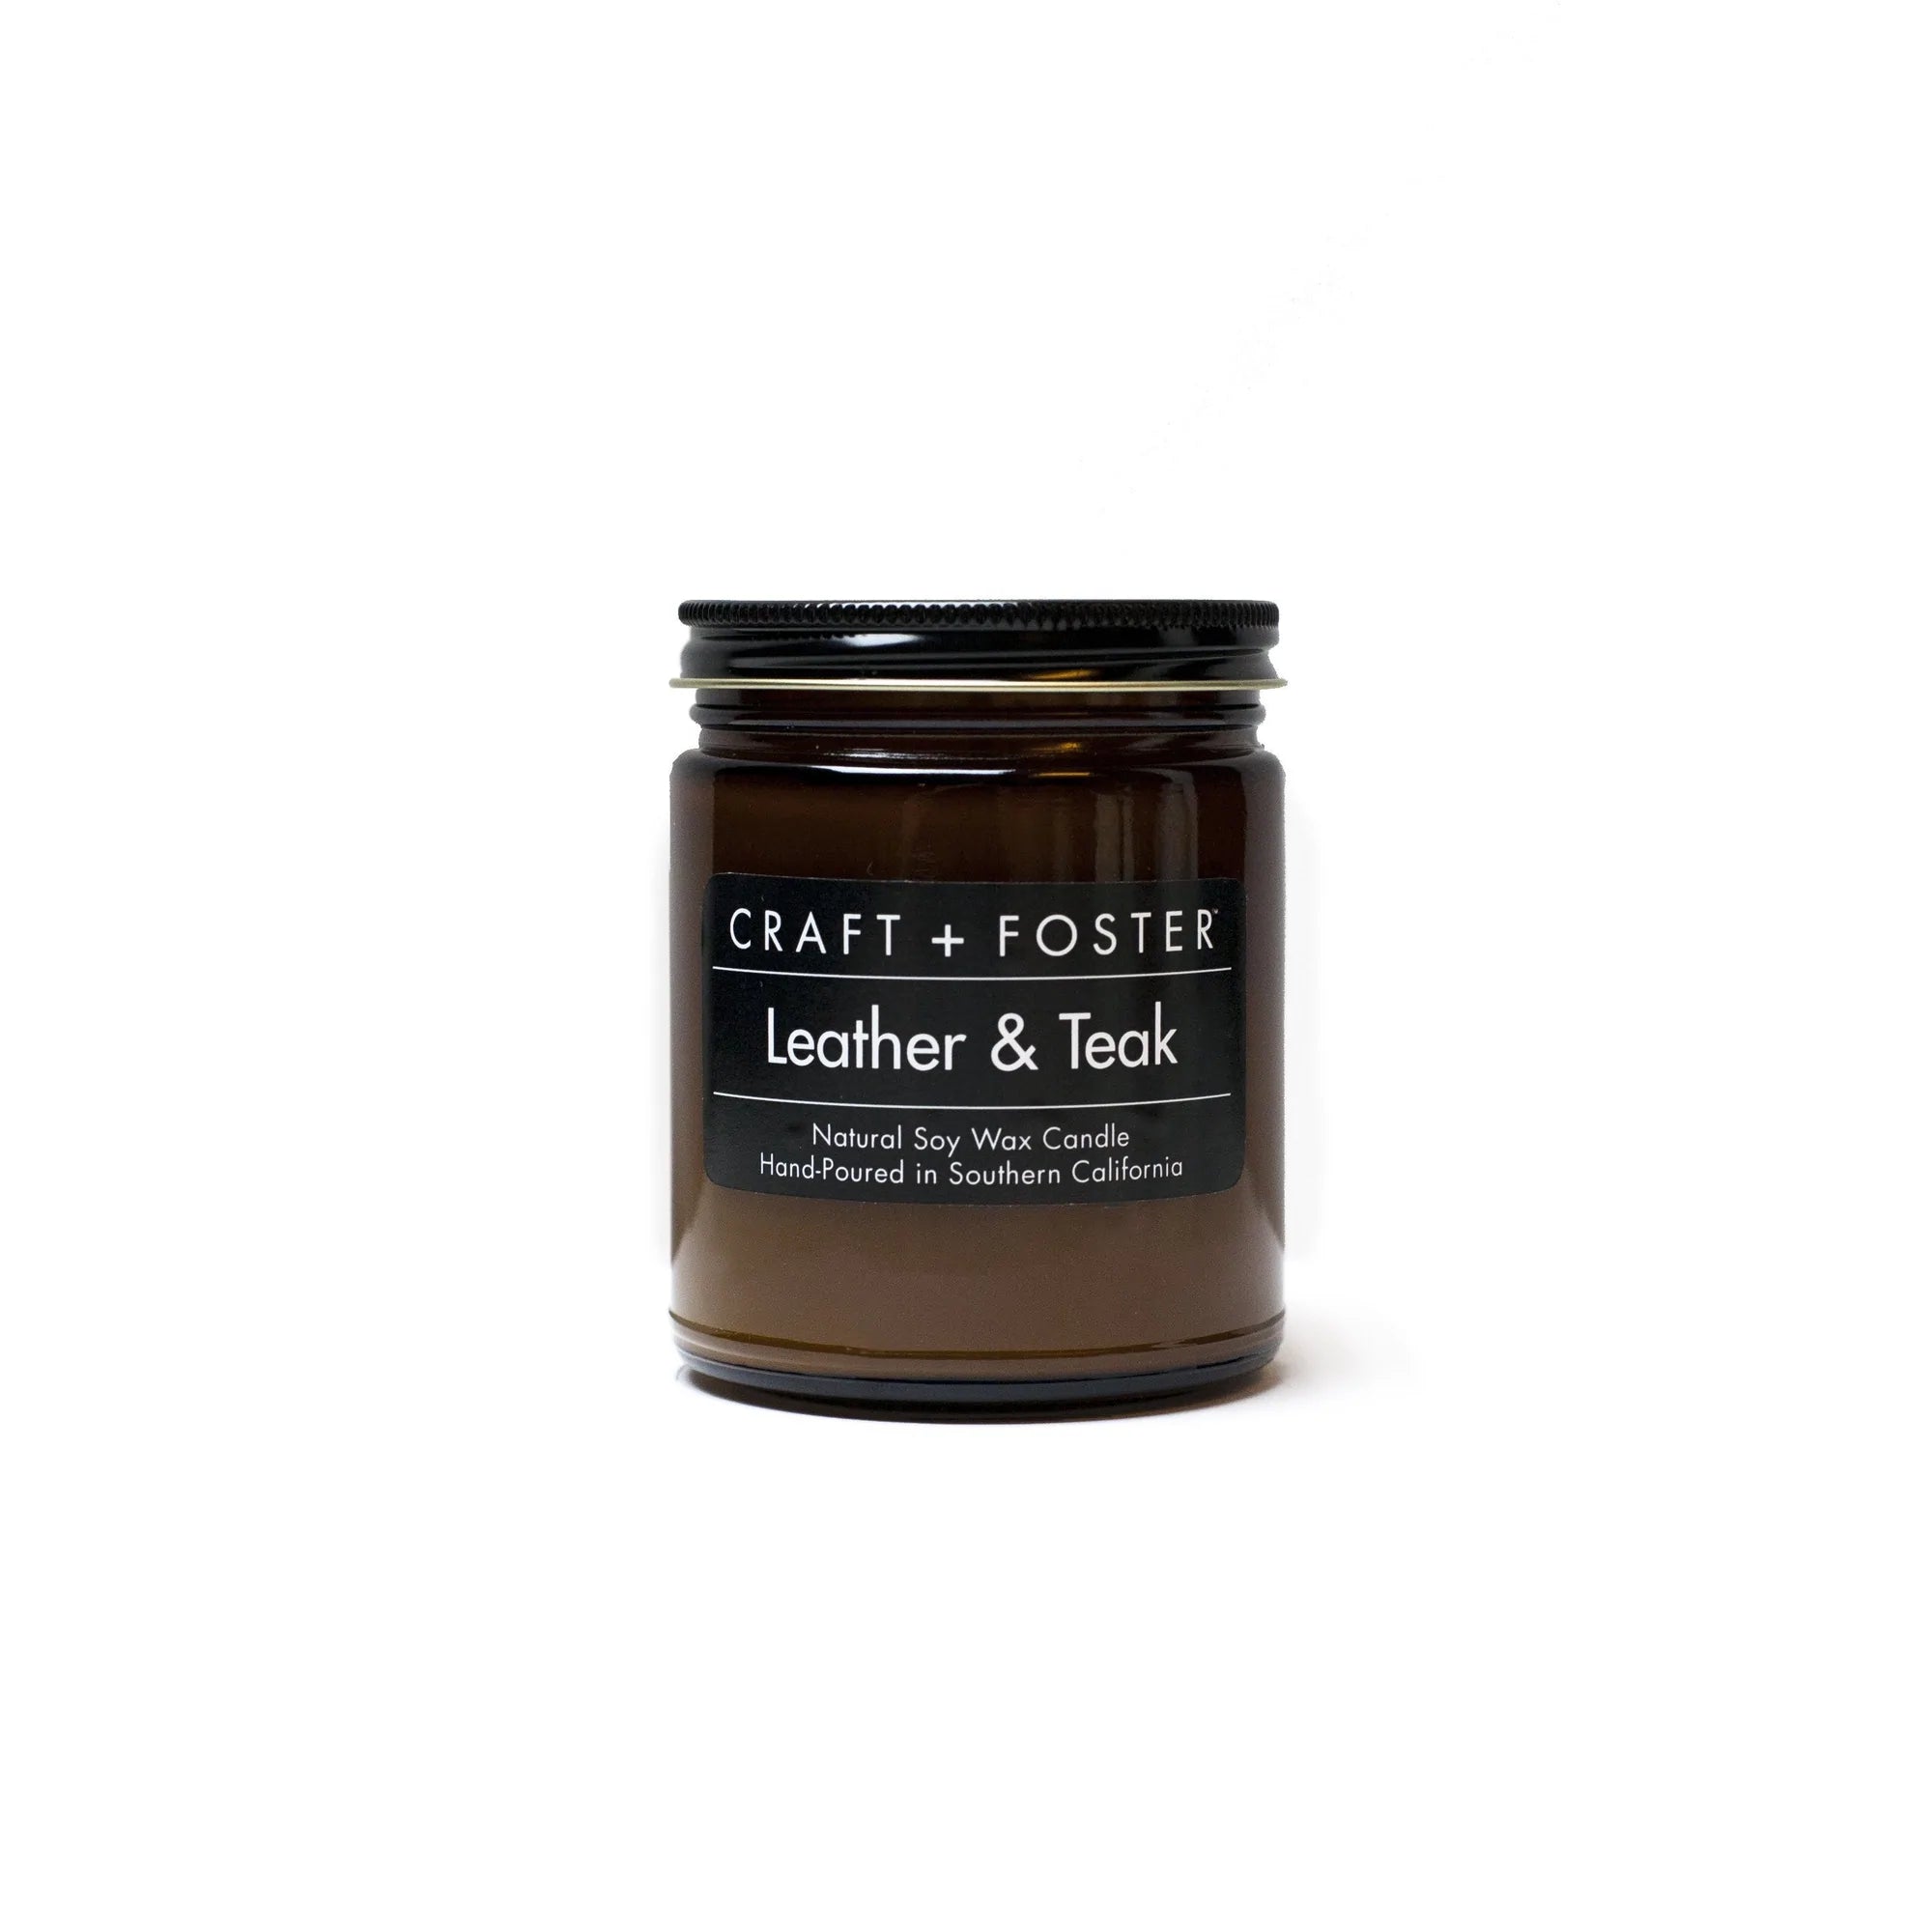 LEATHER & TEAK - 8oz NATURAL SOY WAX CANDLE